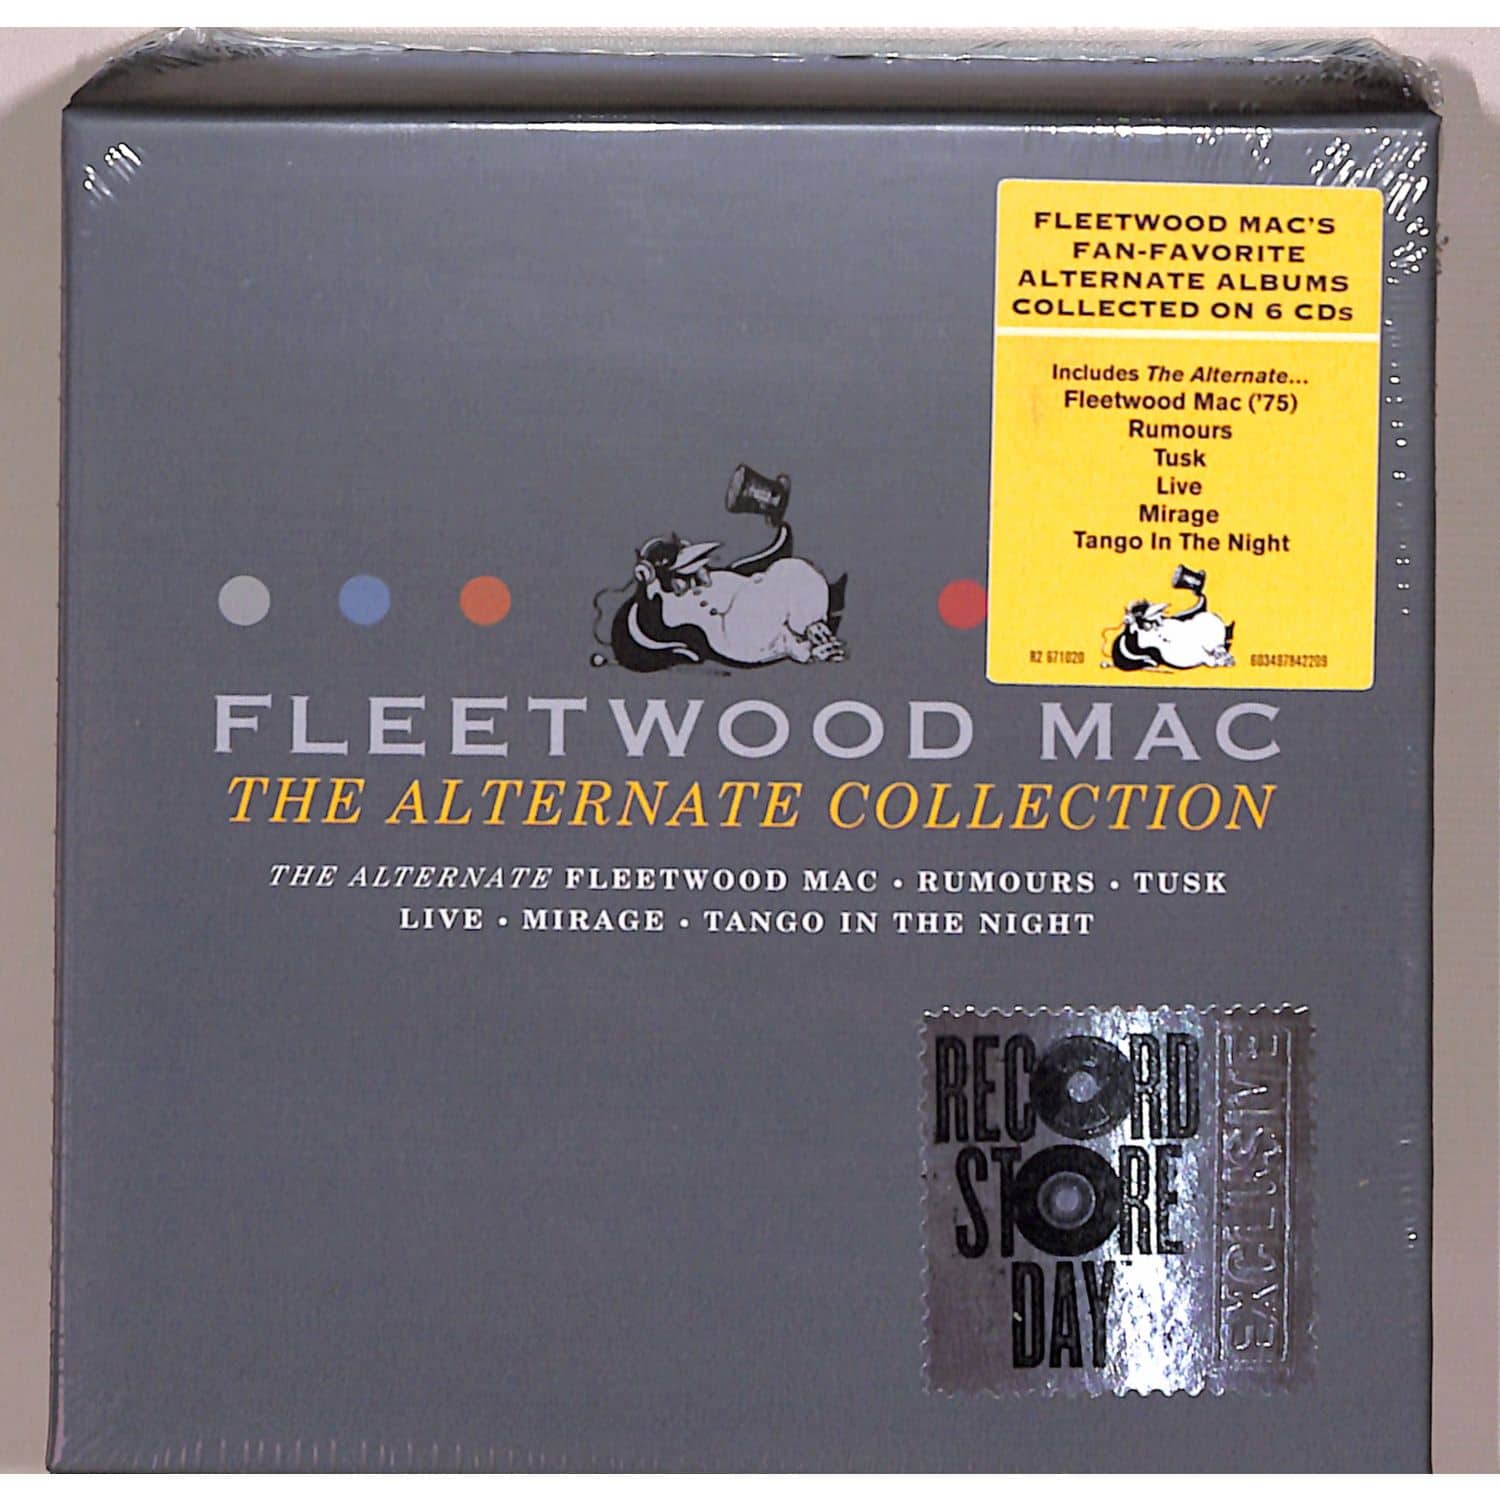 Fleetwood Mac - THE ALTERNATE COLLECTION 